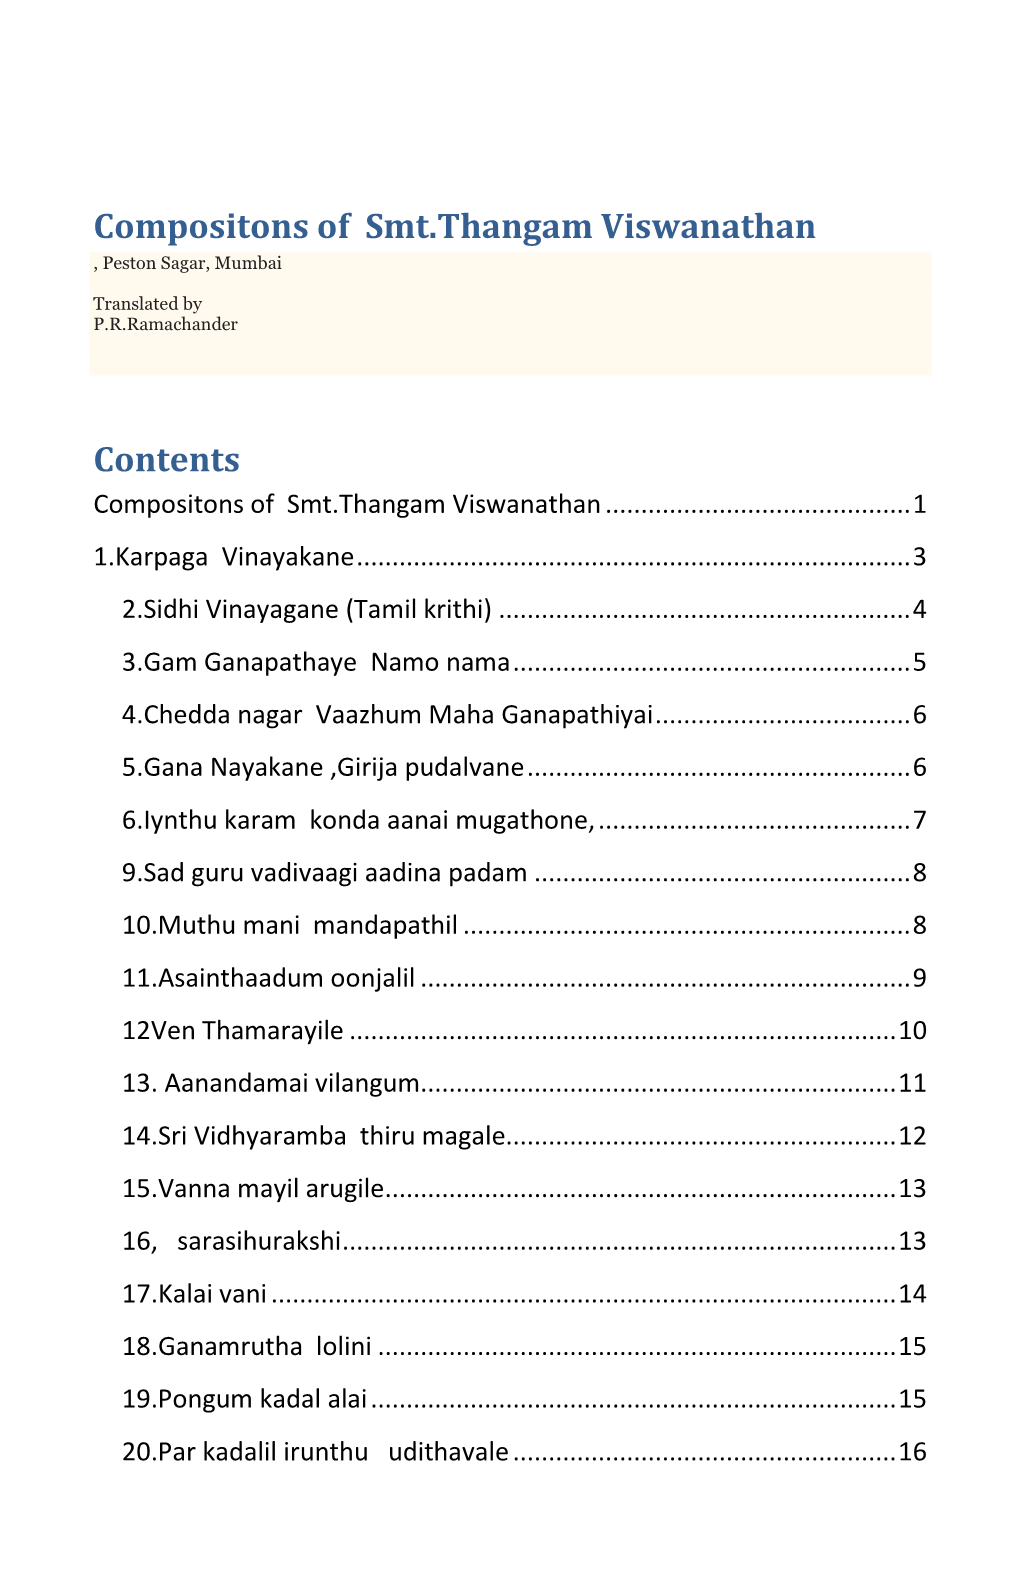 Compositons of Smt.Thangam Viswanathan Contents